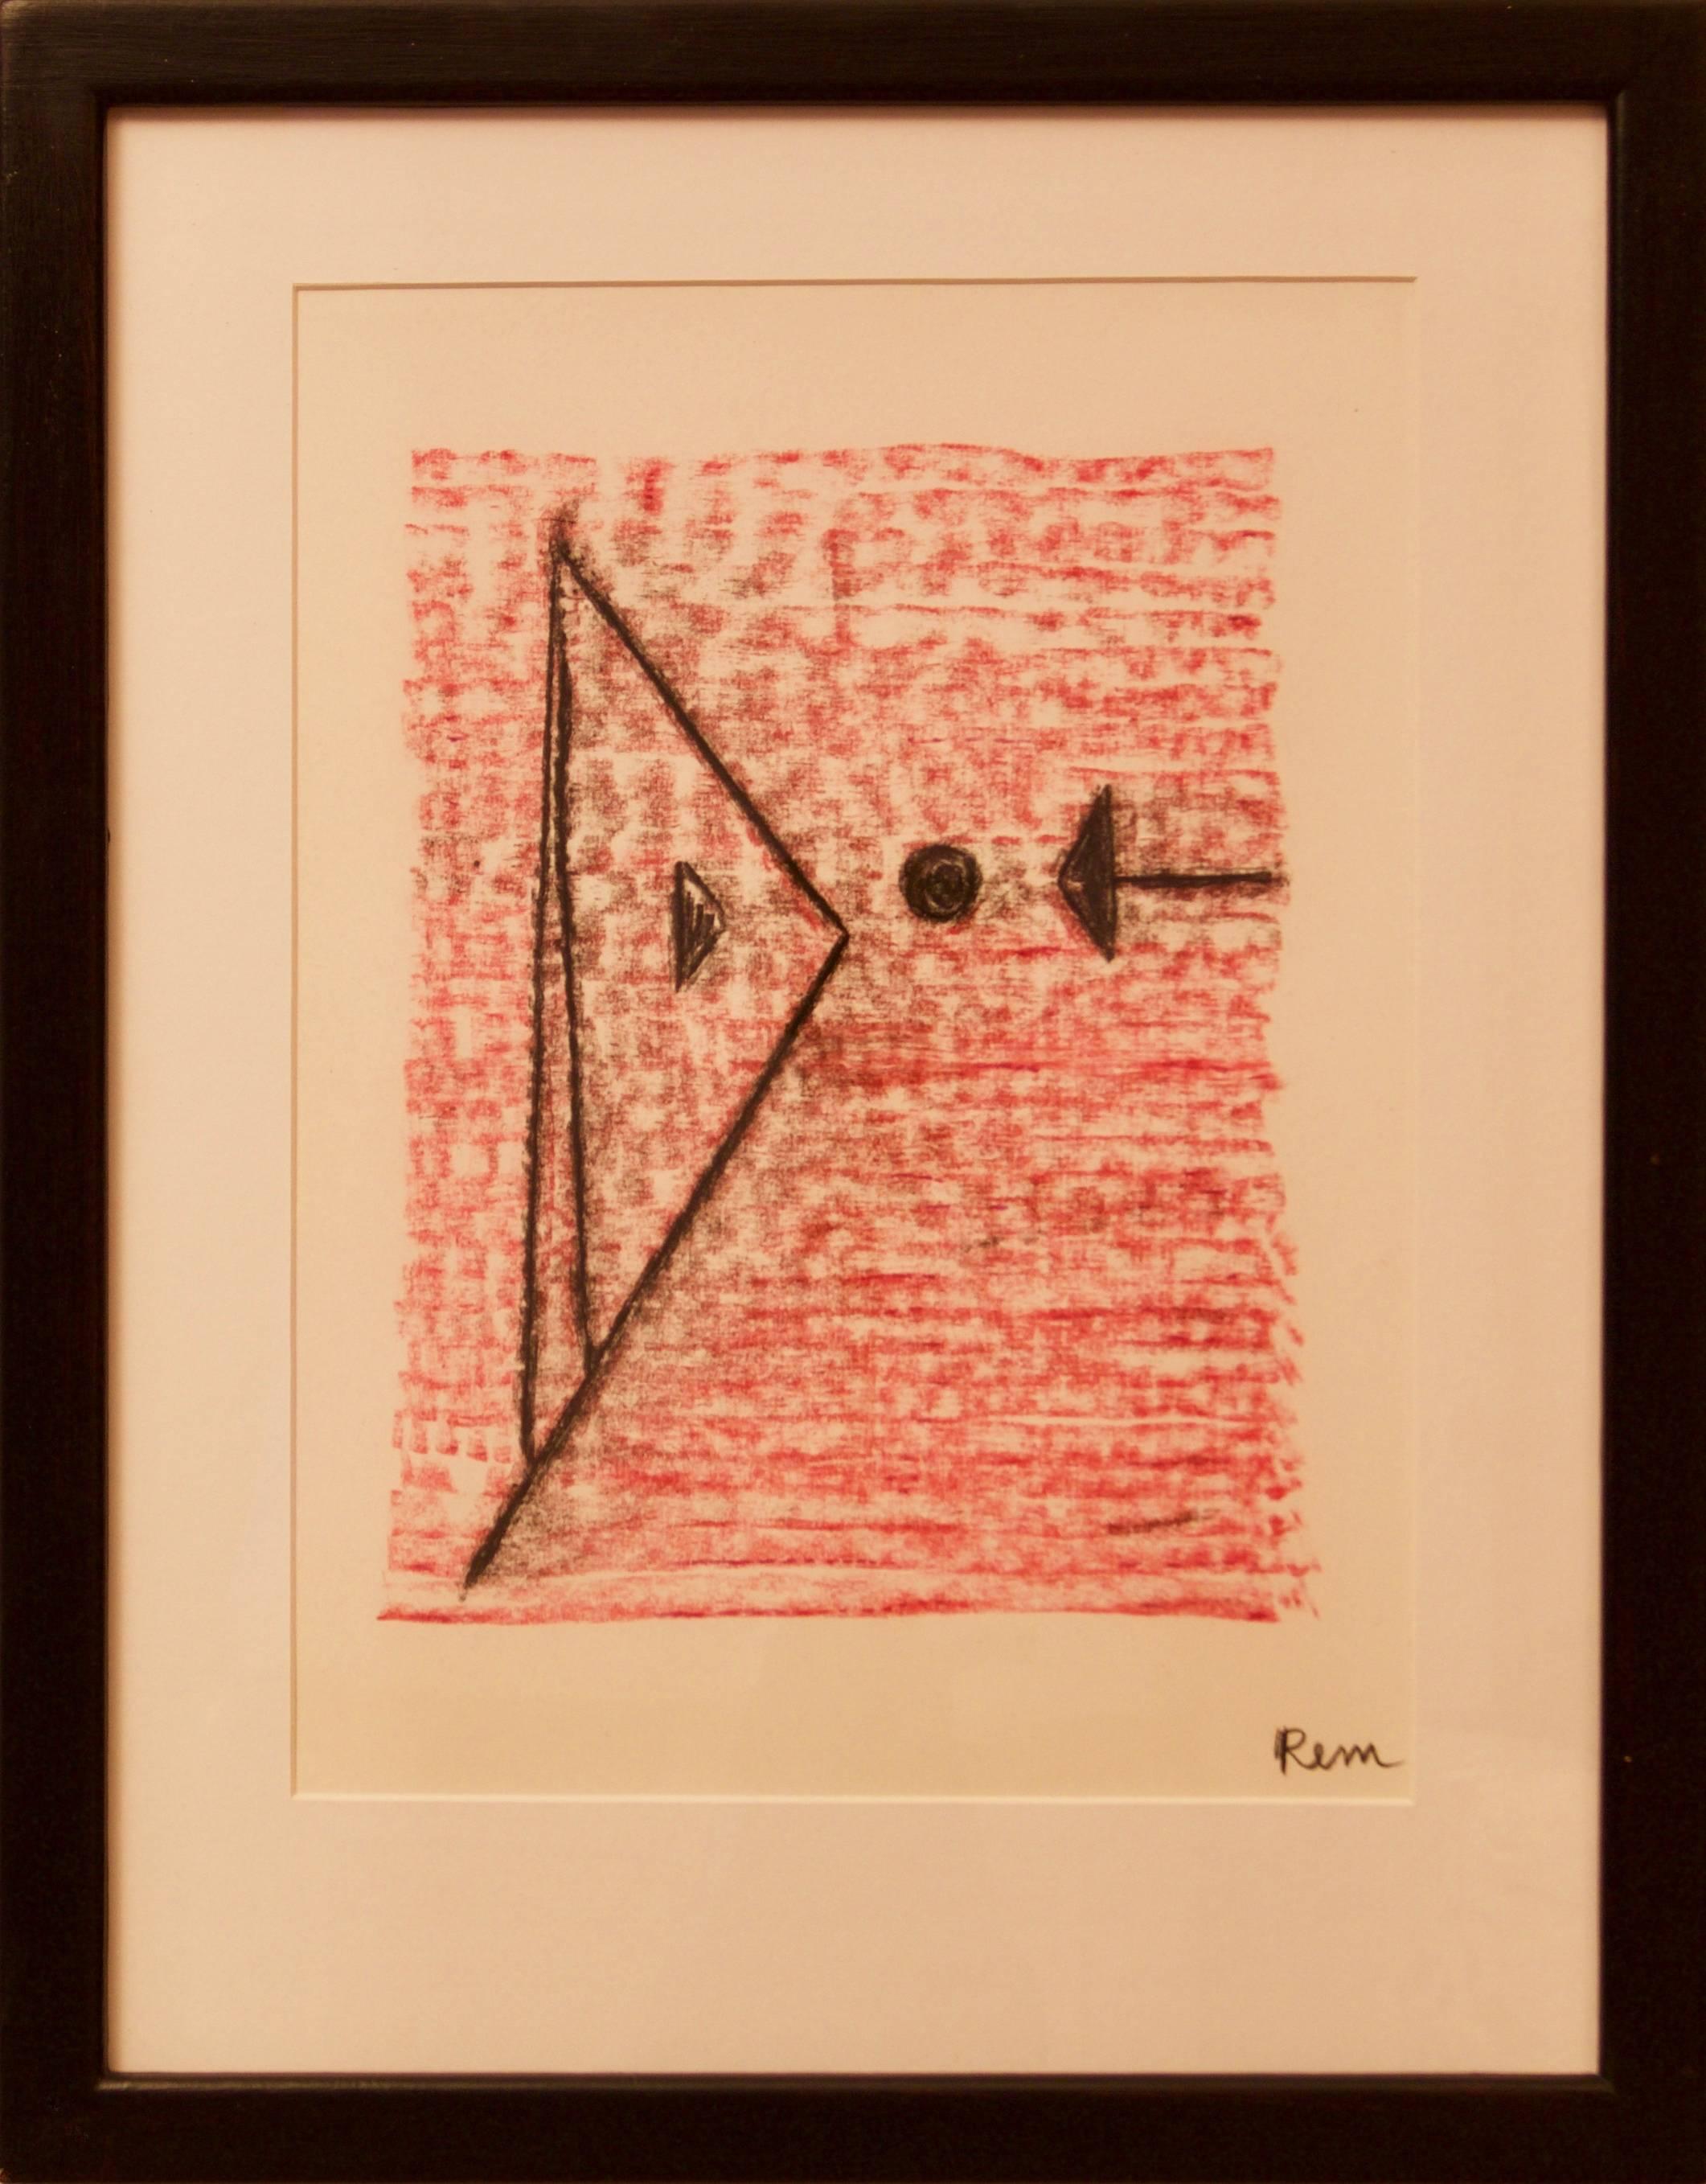 Abstract Mixed Media Drawing - Mid 20th Century by Rem Raymond Coninckx Belgium 2